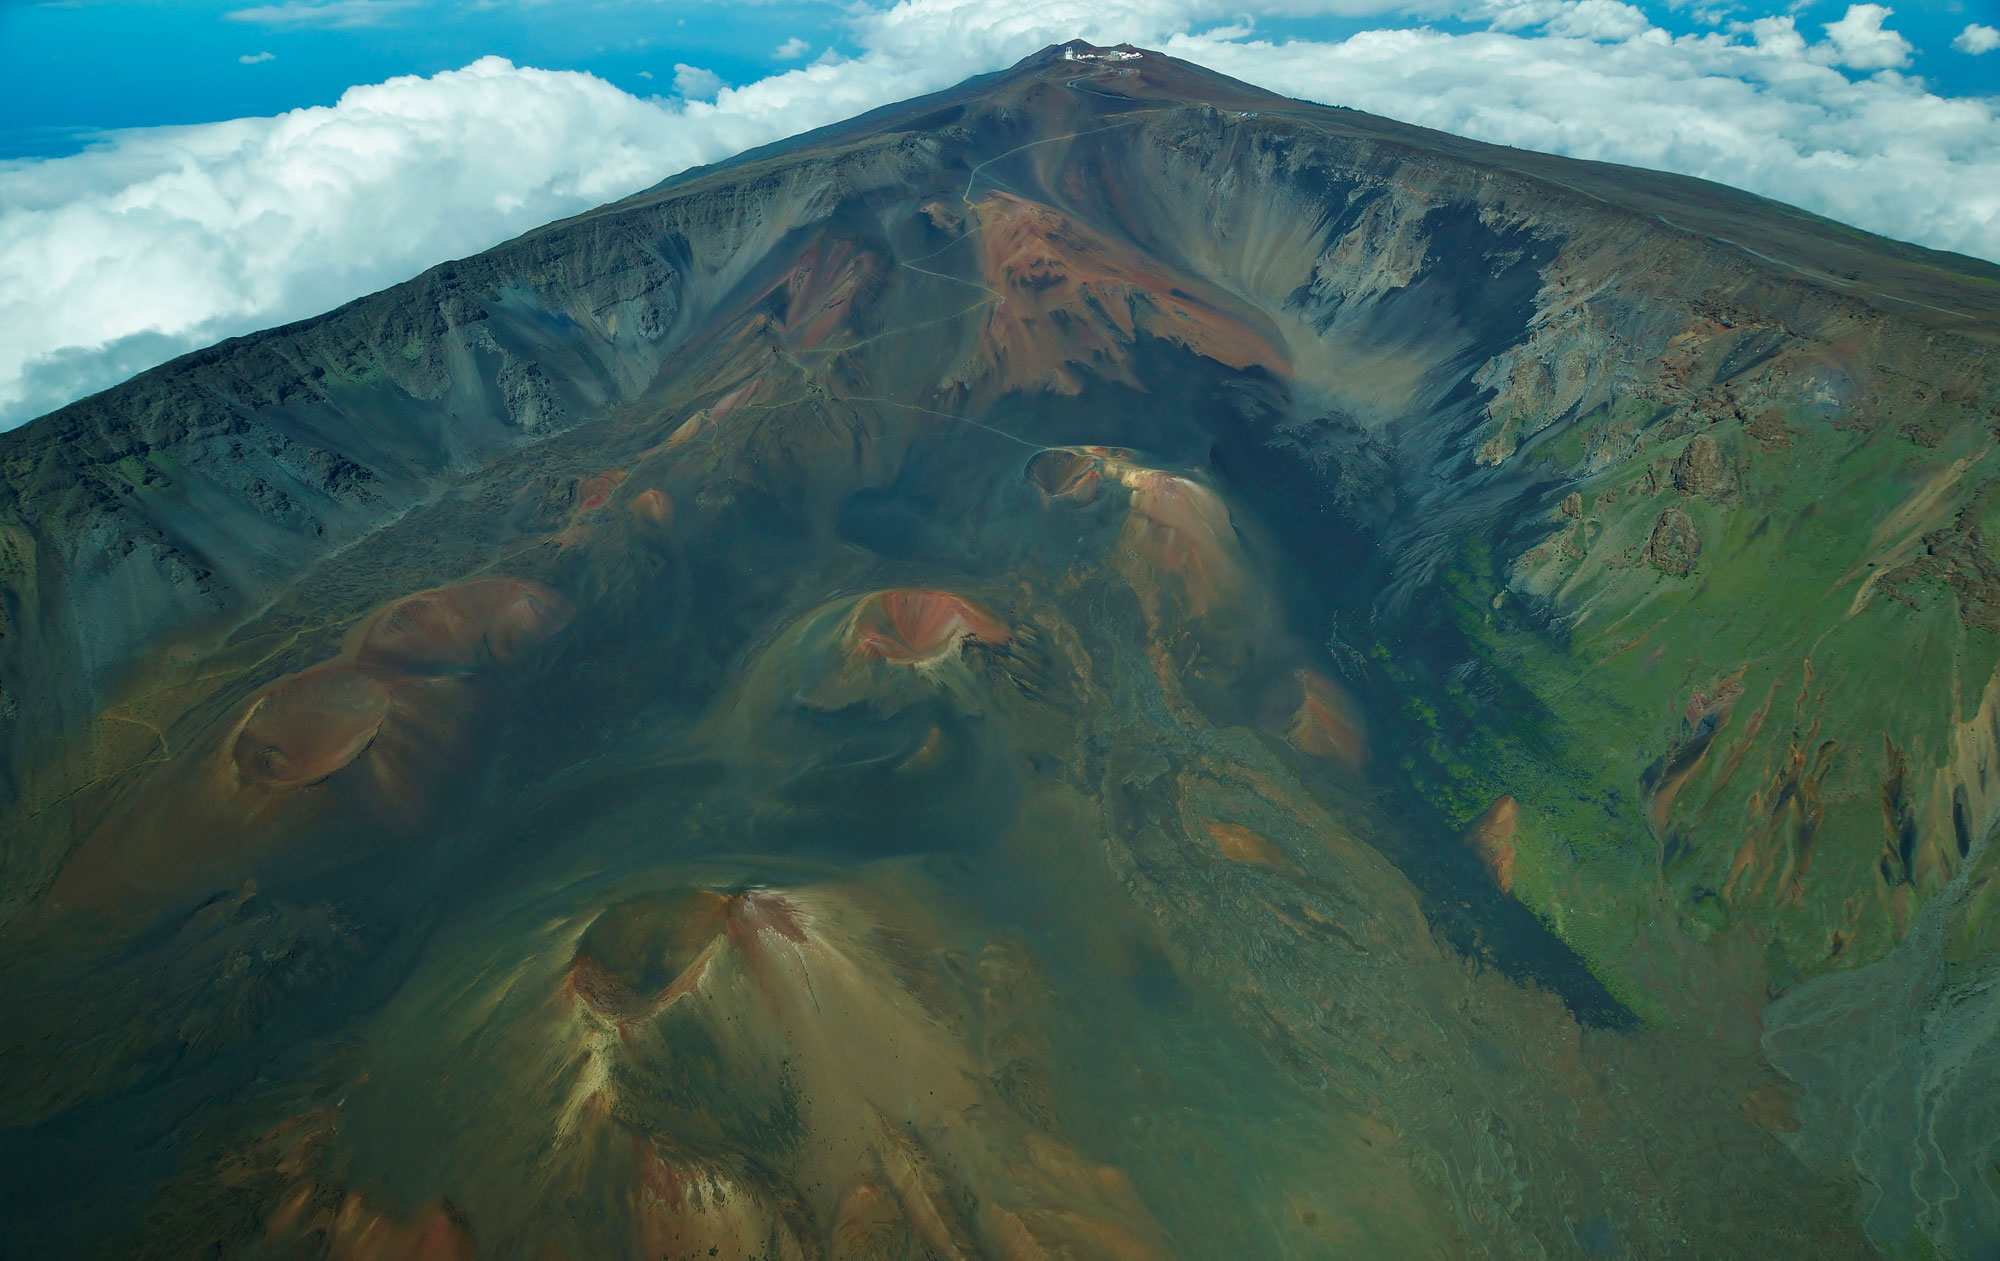 Photograph of cinder cones on Haleakala volcano, Maui. The photo shows the summit of a volcano with cinder cones on its flank. Each cone is conical in shape with a central depression.